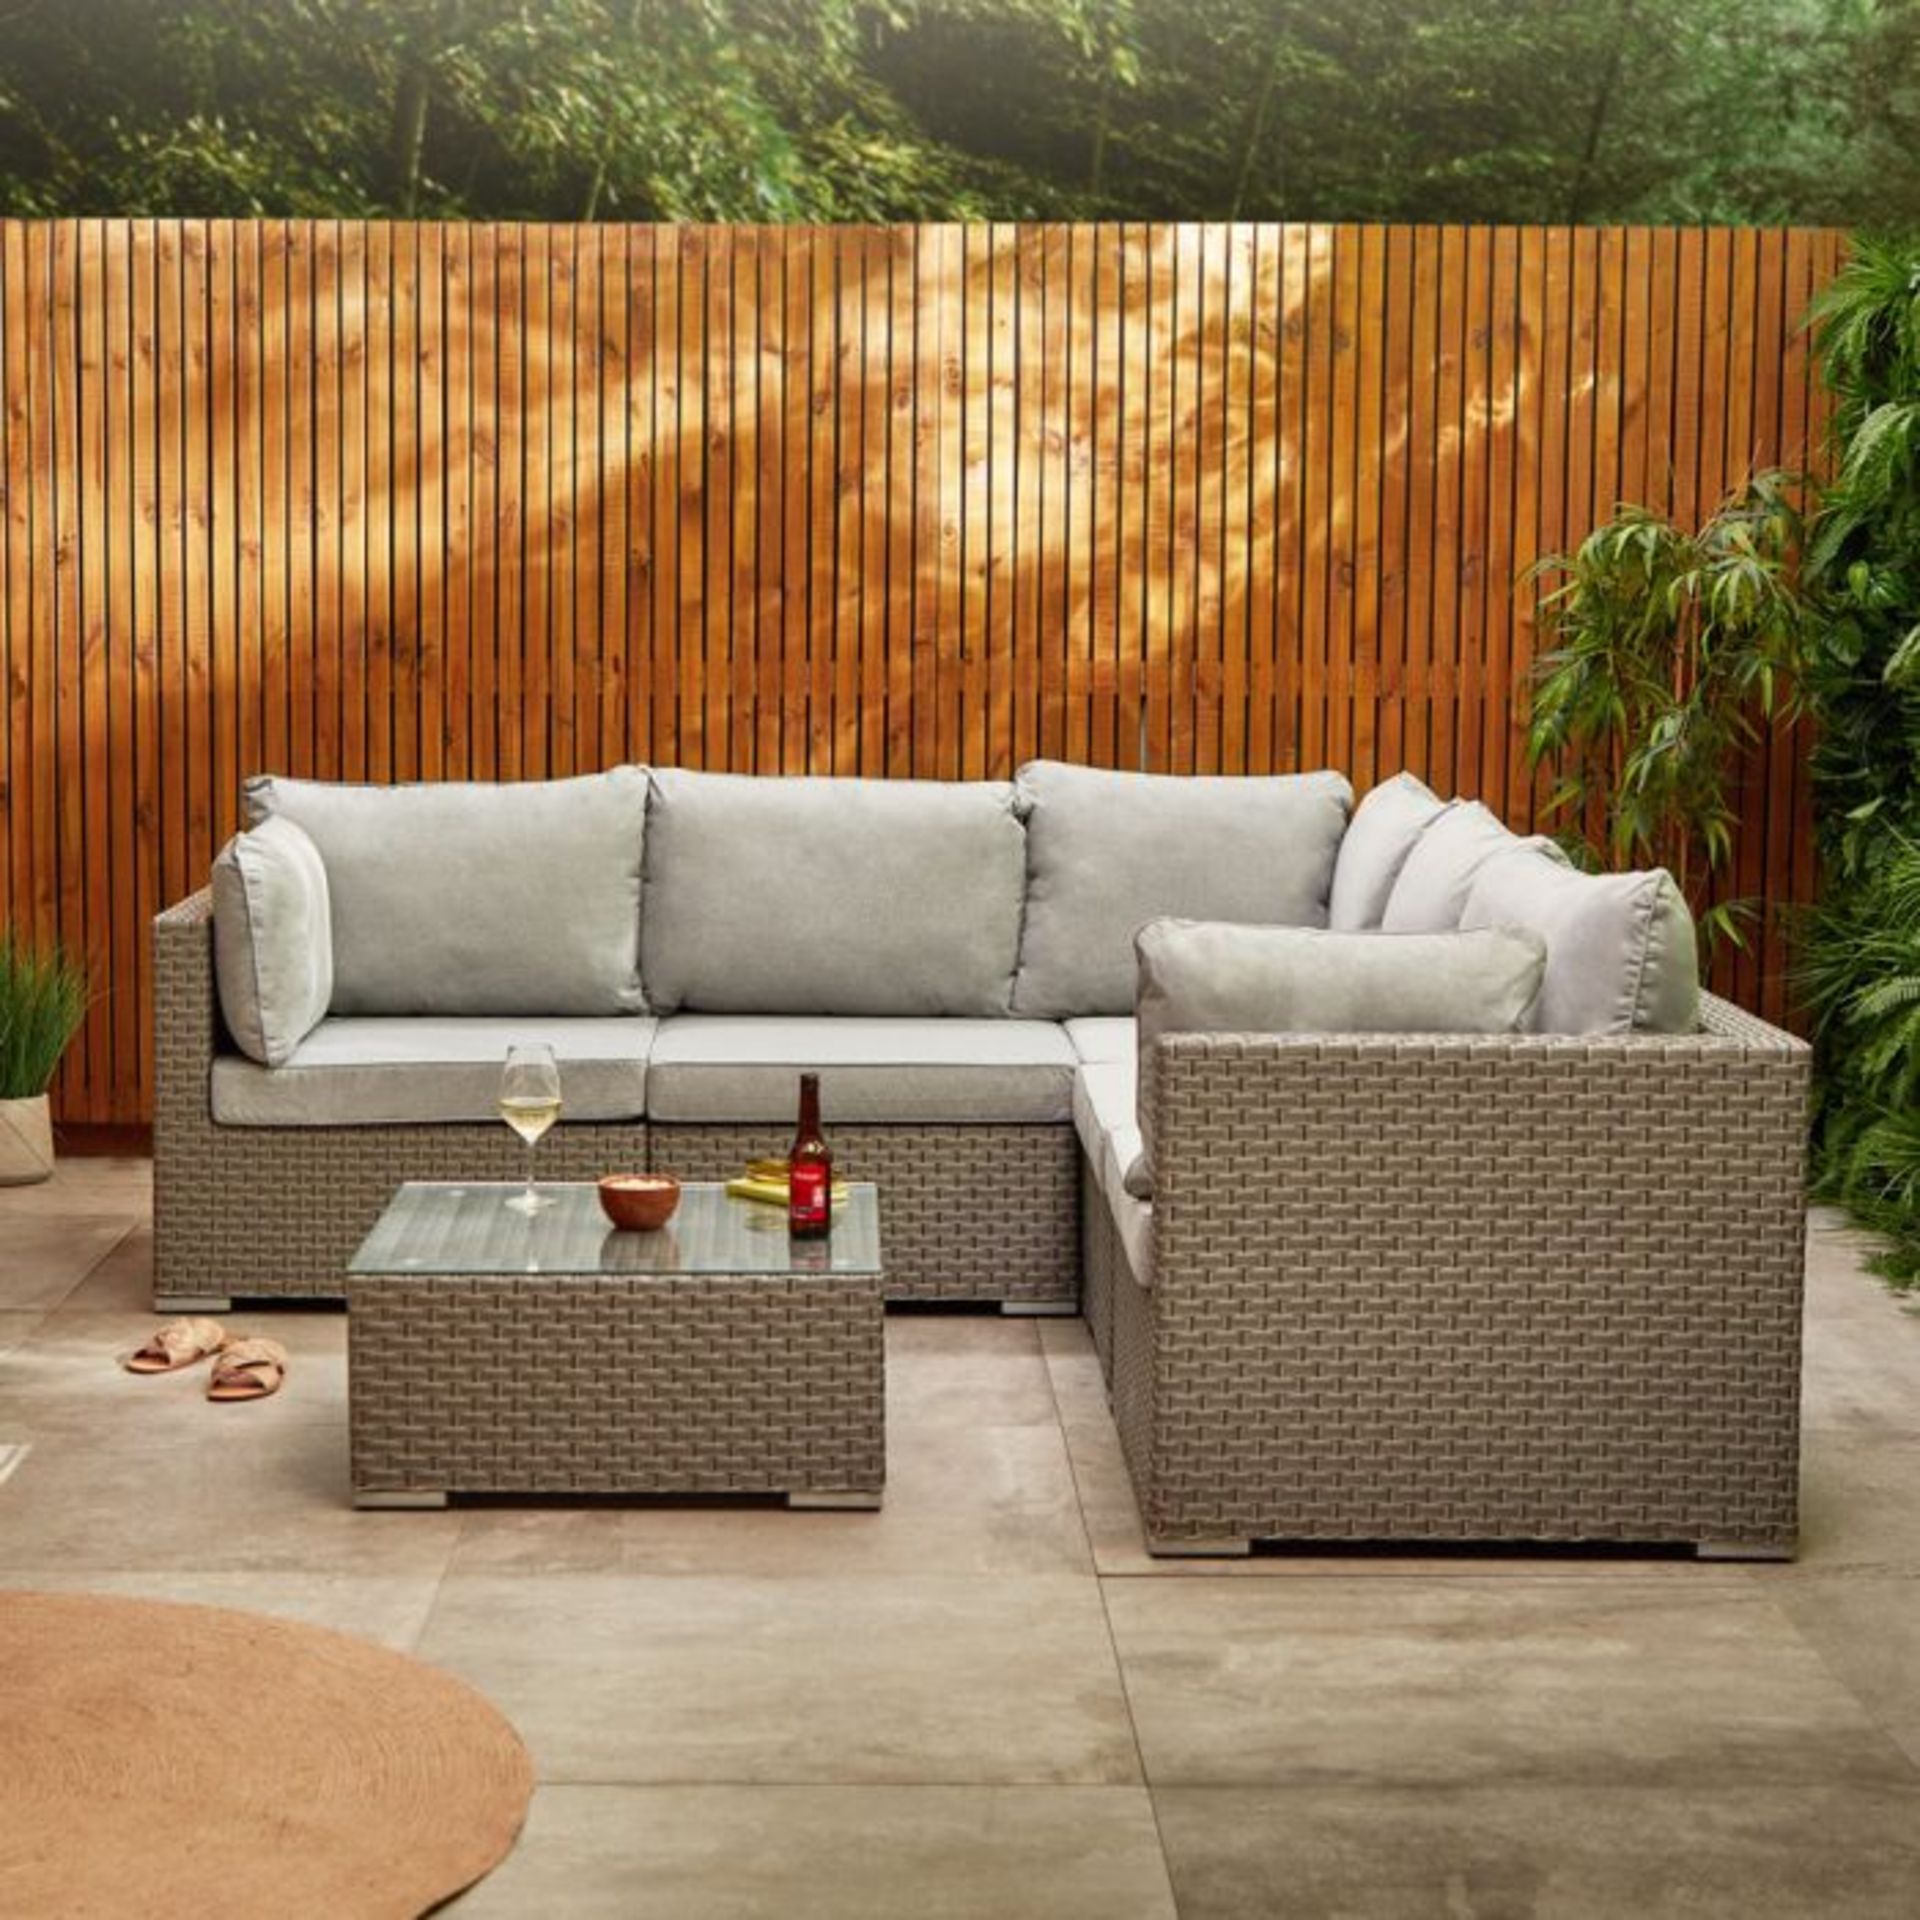 New & Boxed 6 Seater Amefi Rattan Corner Sofa Set. RRP £1,329. Be ready for any garden party and